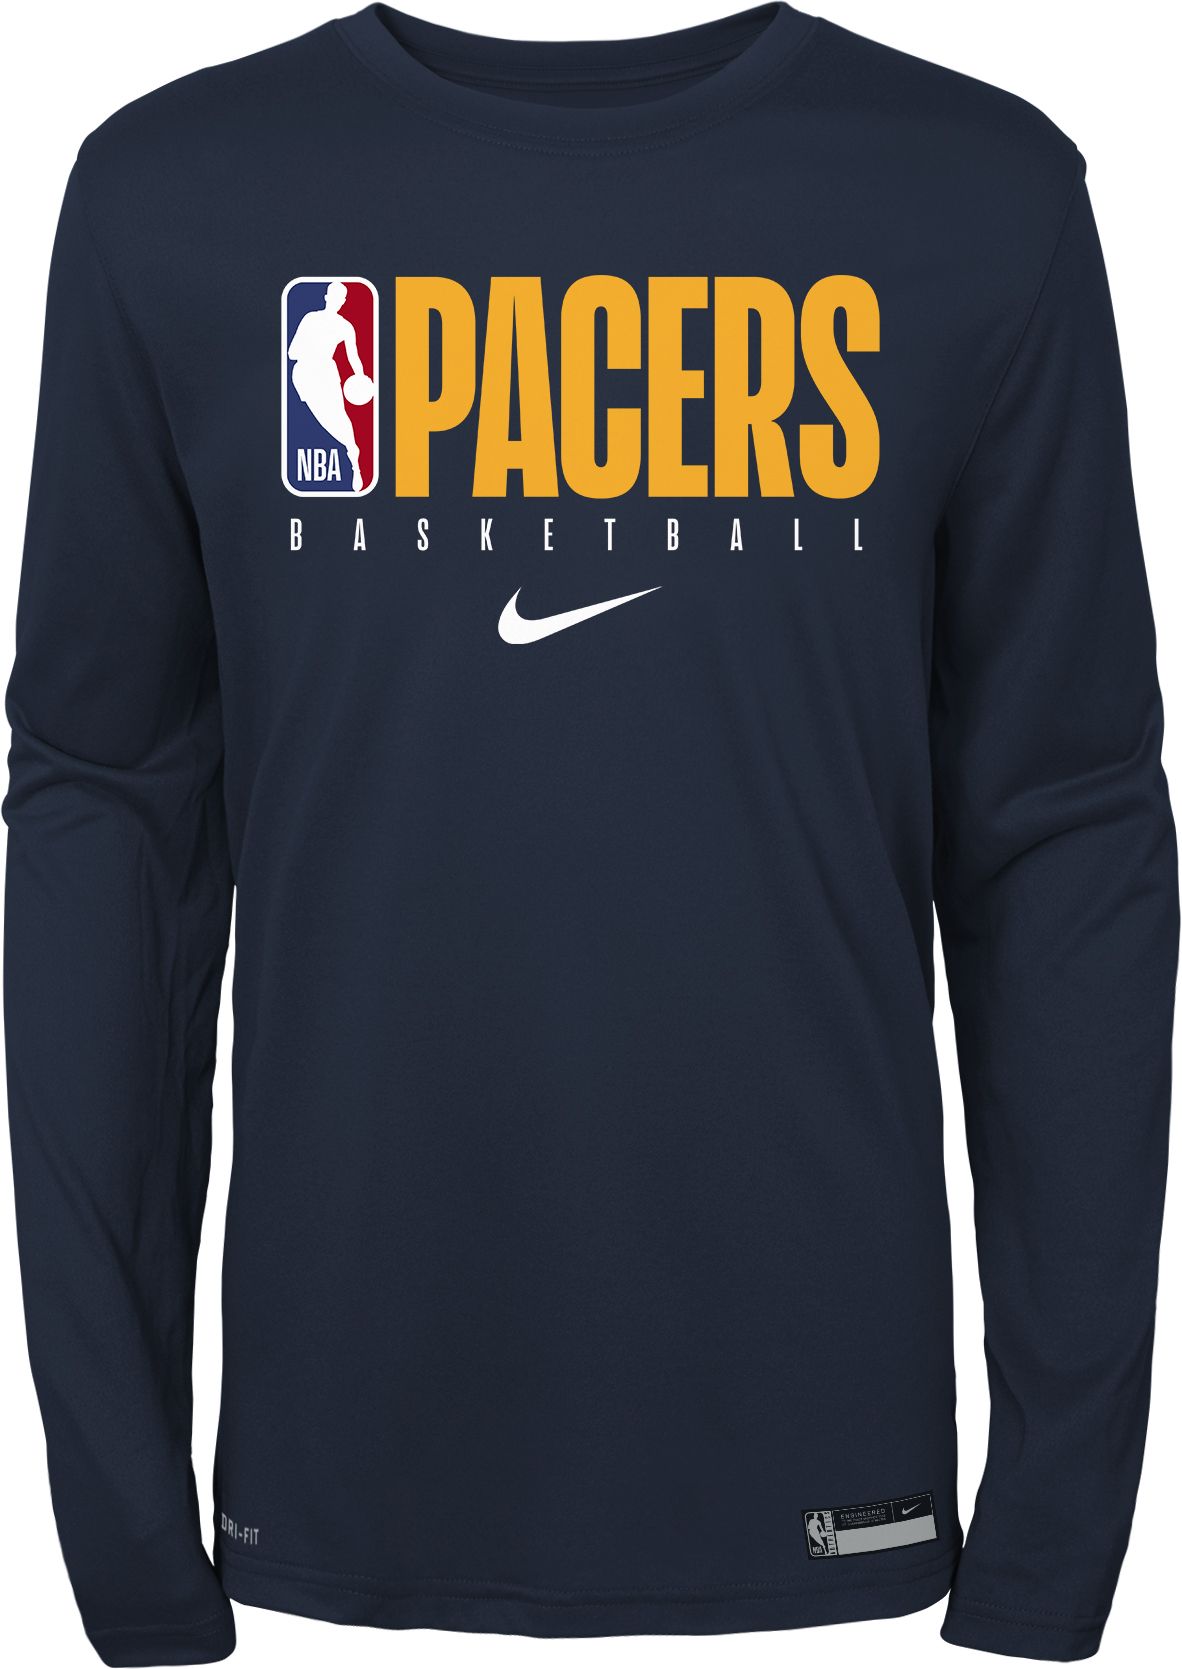 indiana pacers long sleeve shirt